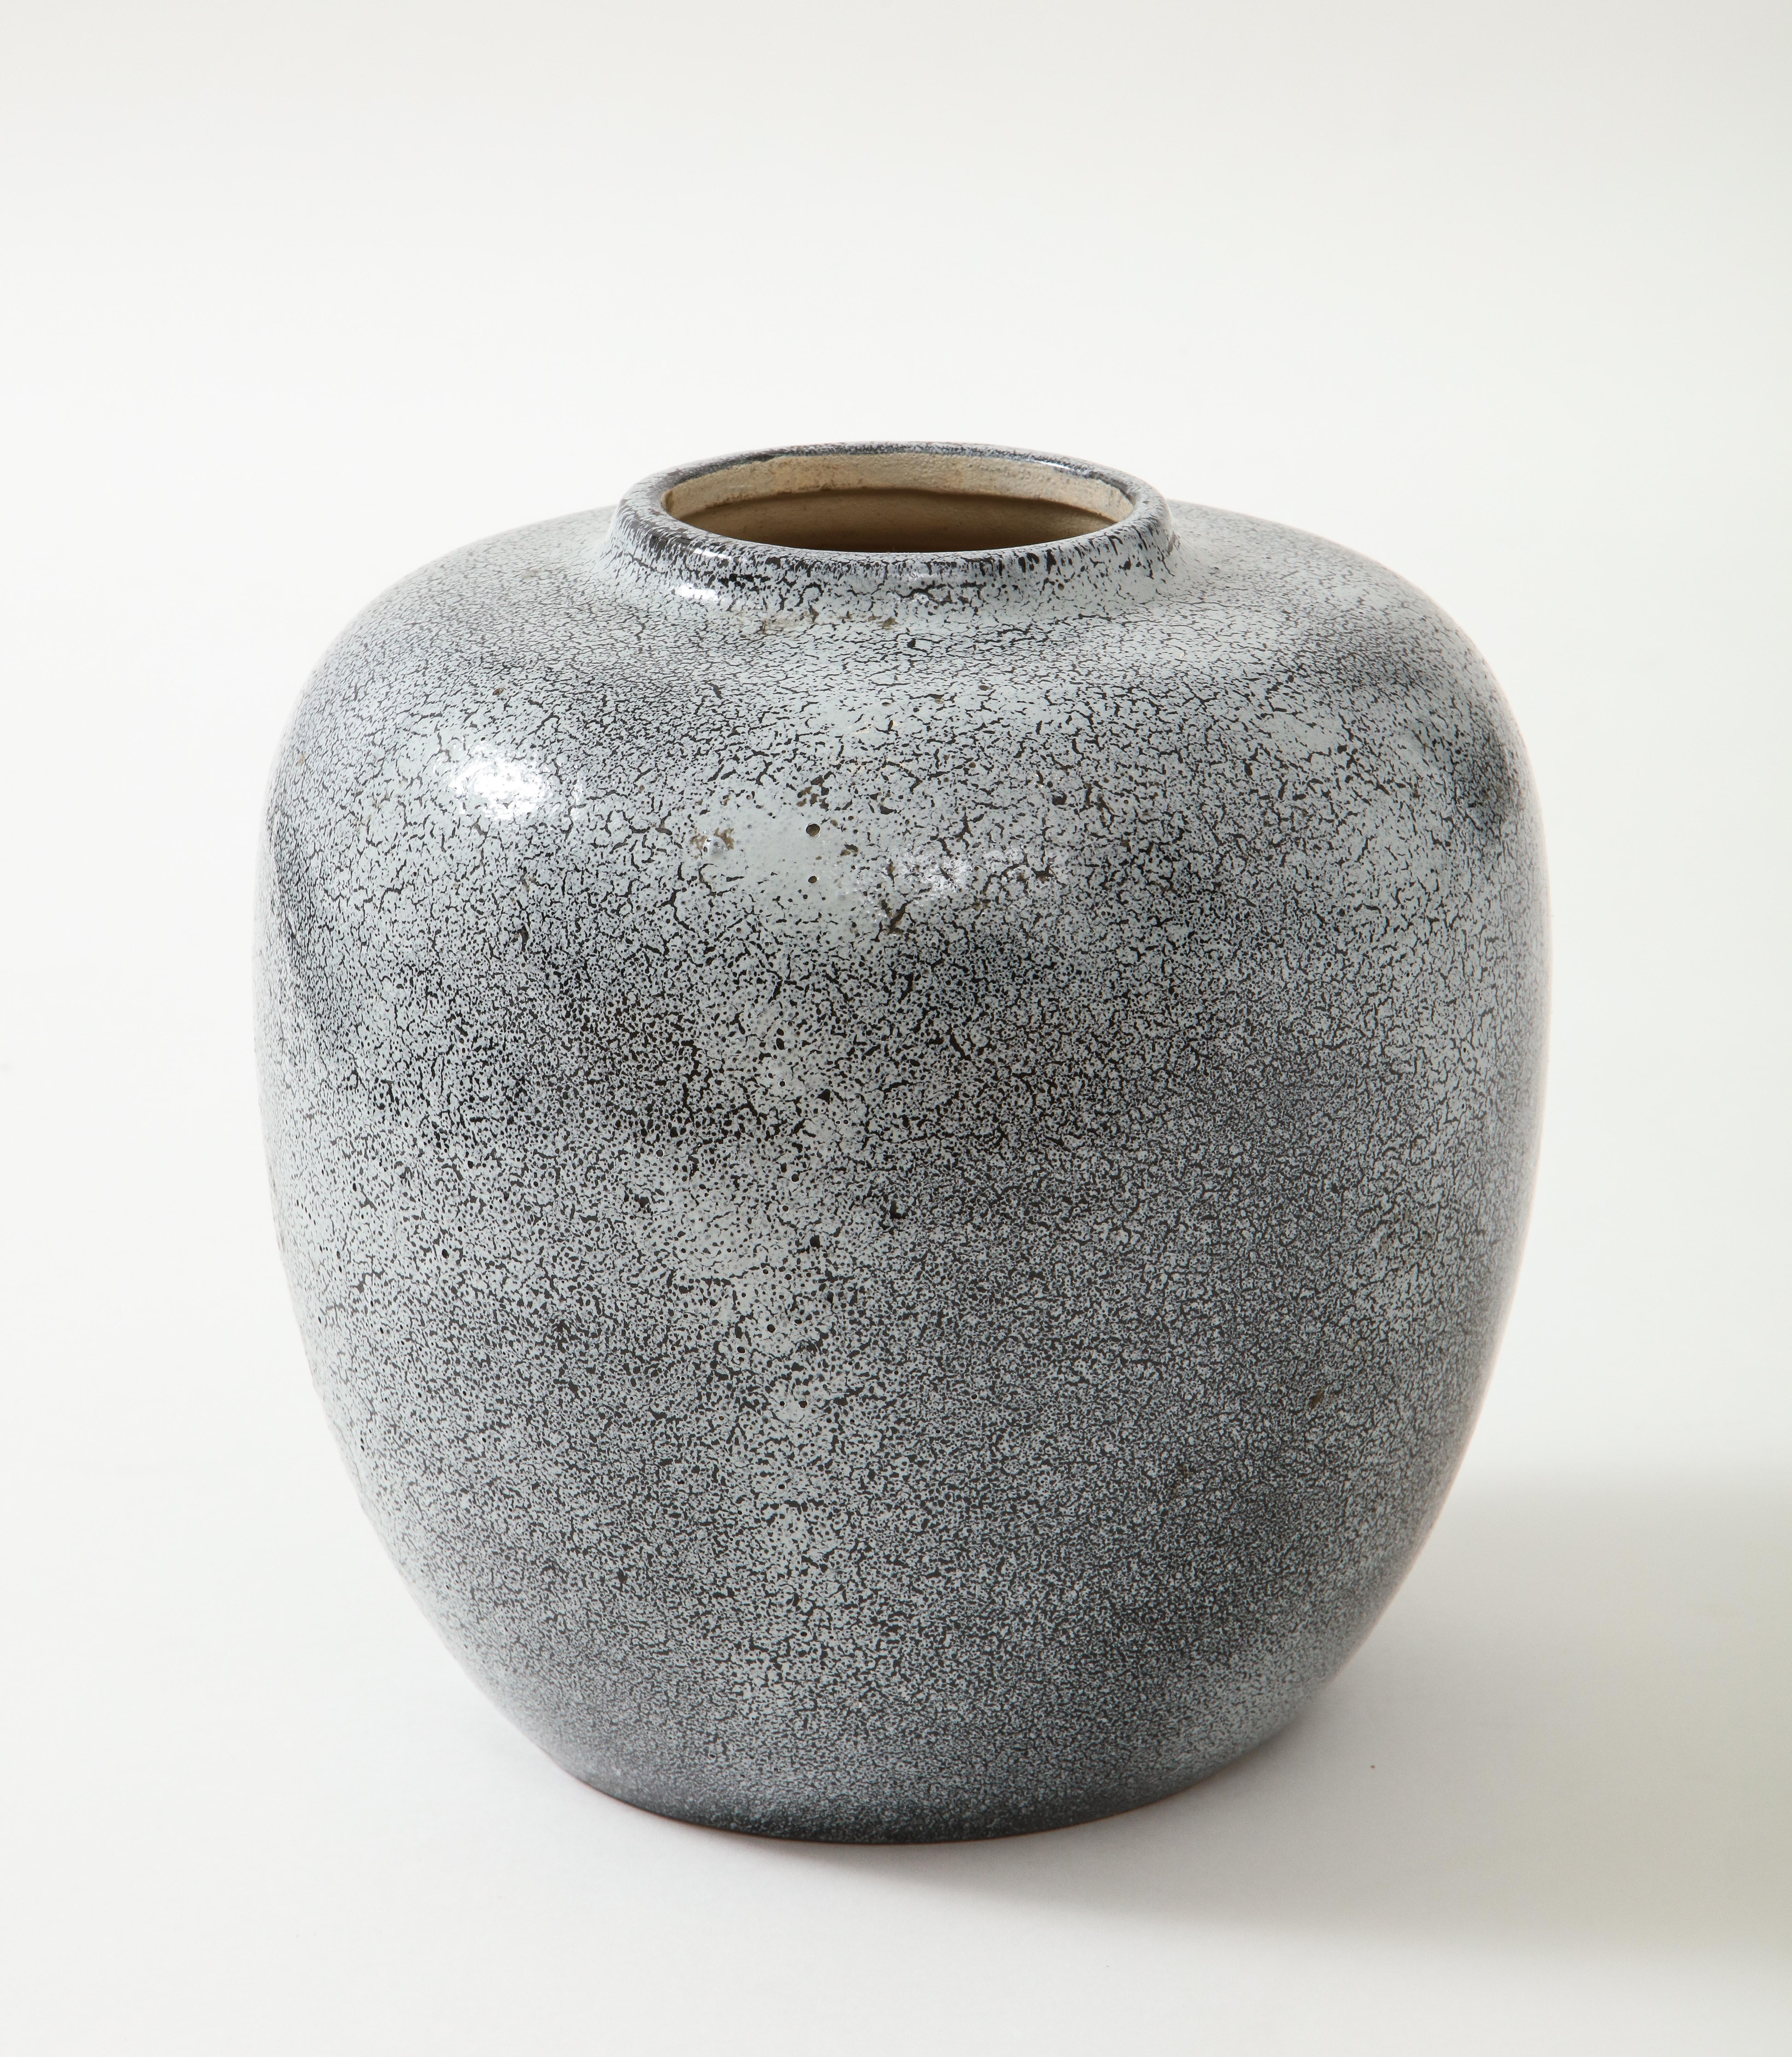 Large Vase by Robert Lallemant (1902-1954), France, circa 1940
signed: 'Lallemant’, '’Made in France’

Grey White Black Enamelled Glaze

H: 9.5 Diameter: 9.25 inches